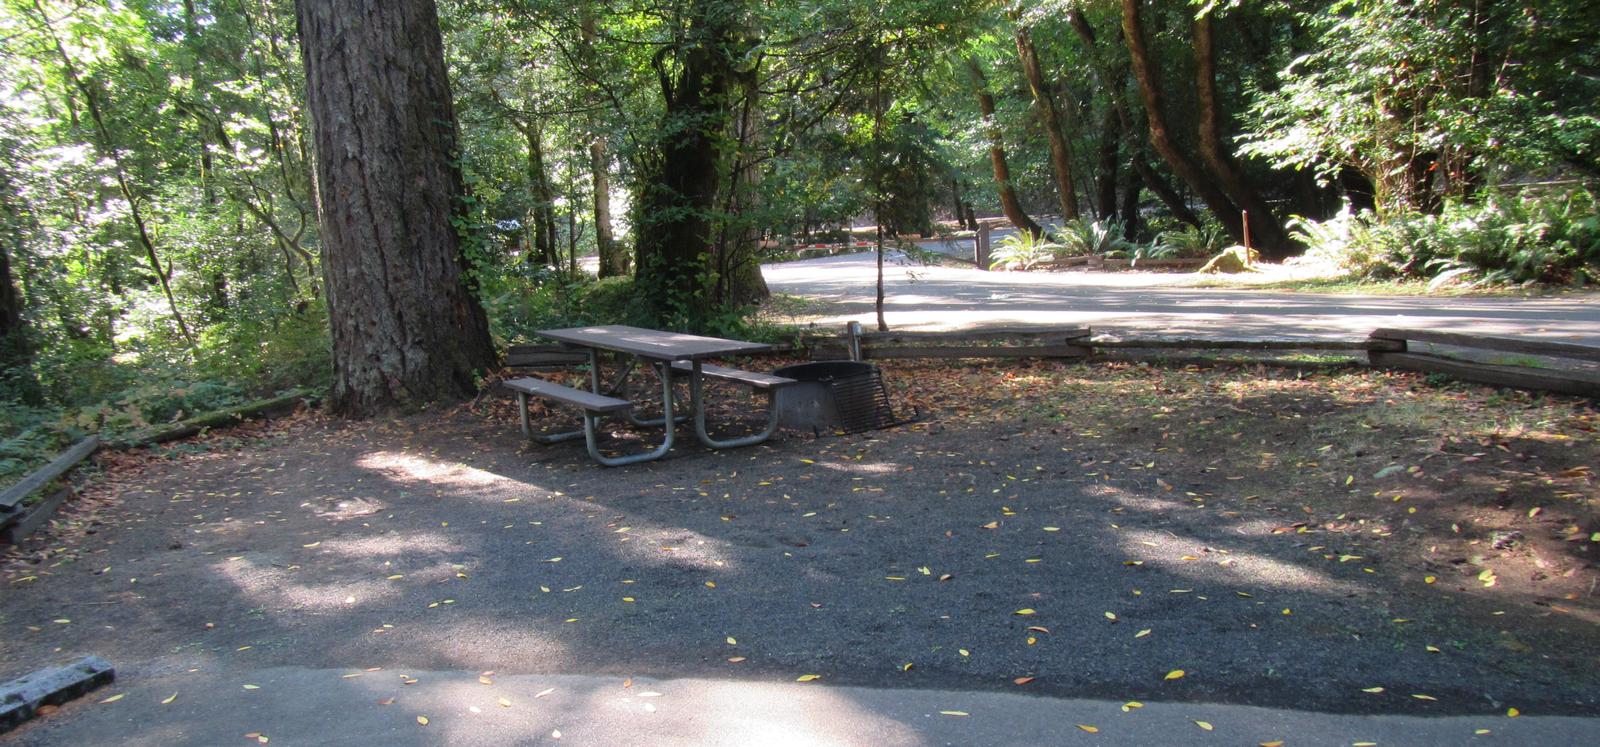 Site includes picnic table with fire ring and views of the river